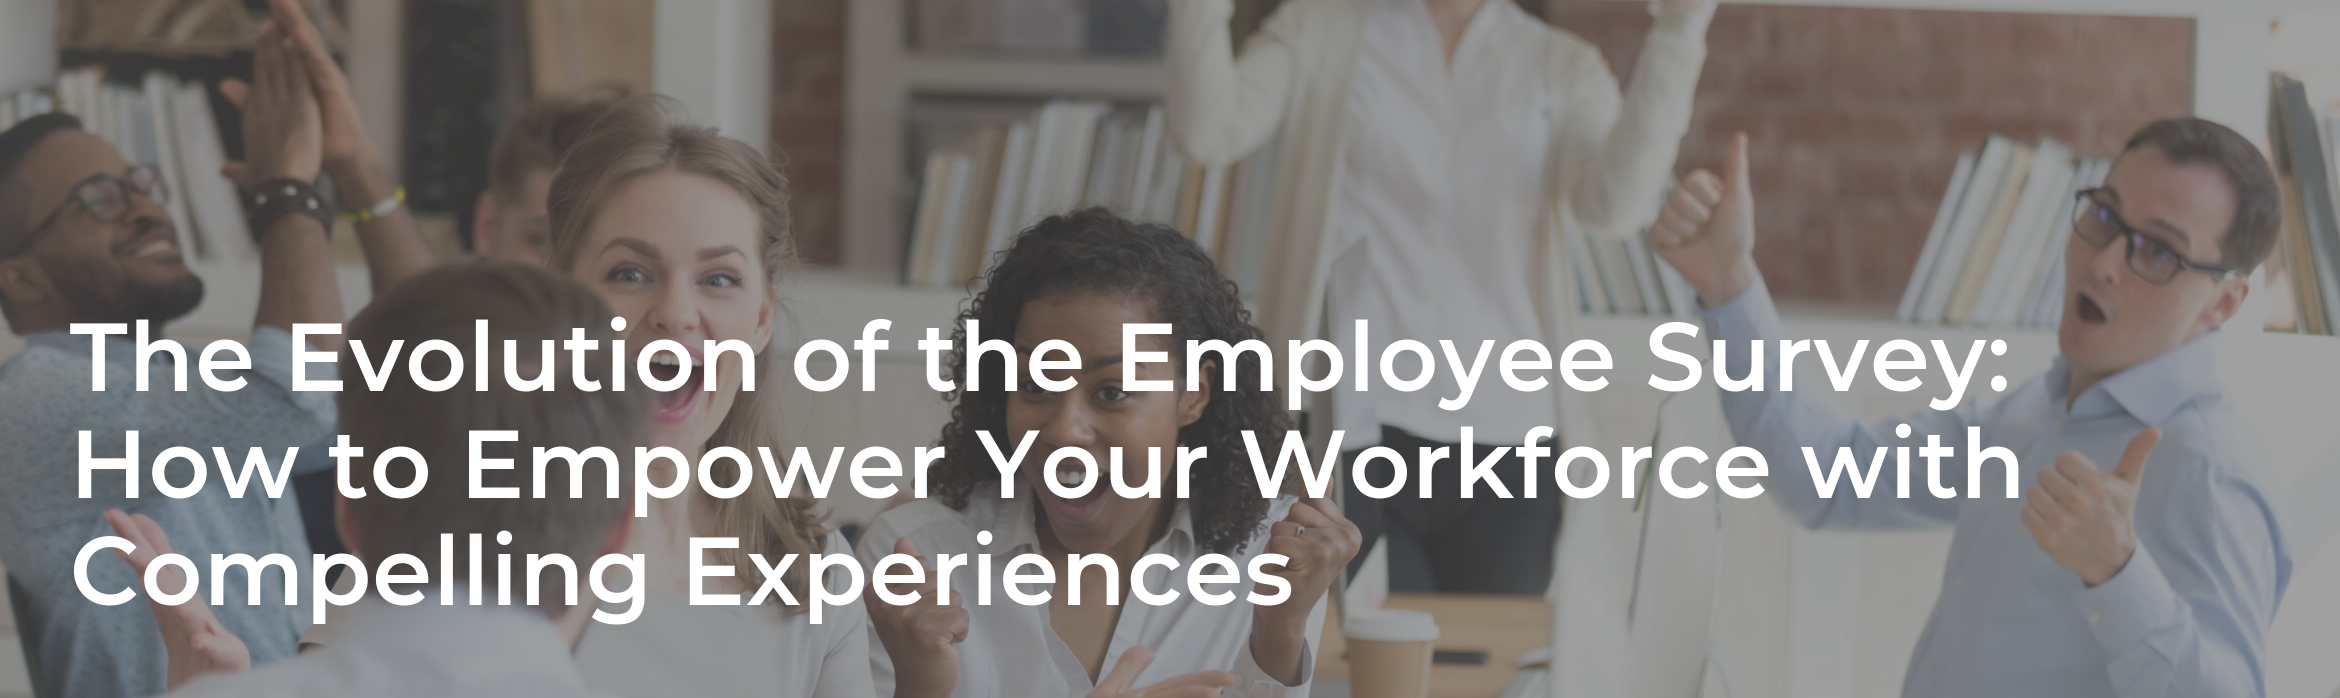 The Evolution of the Employee Survey: How to Empower Your Workforce with Compelling Experiences